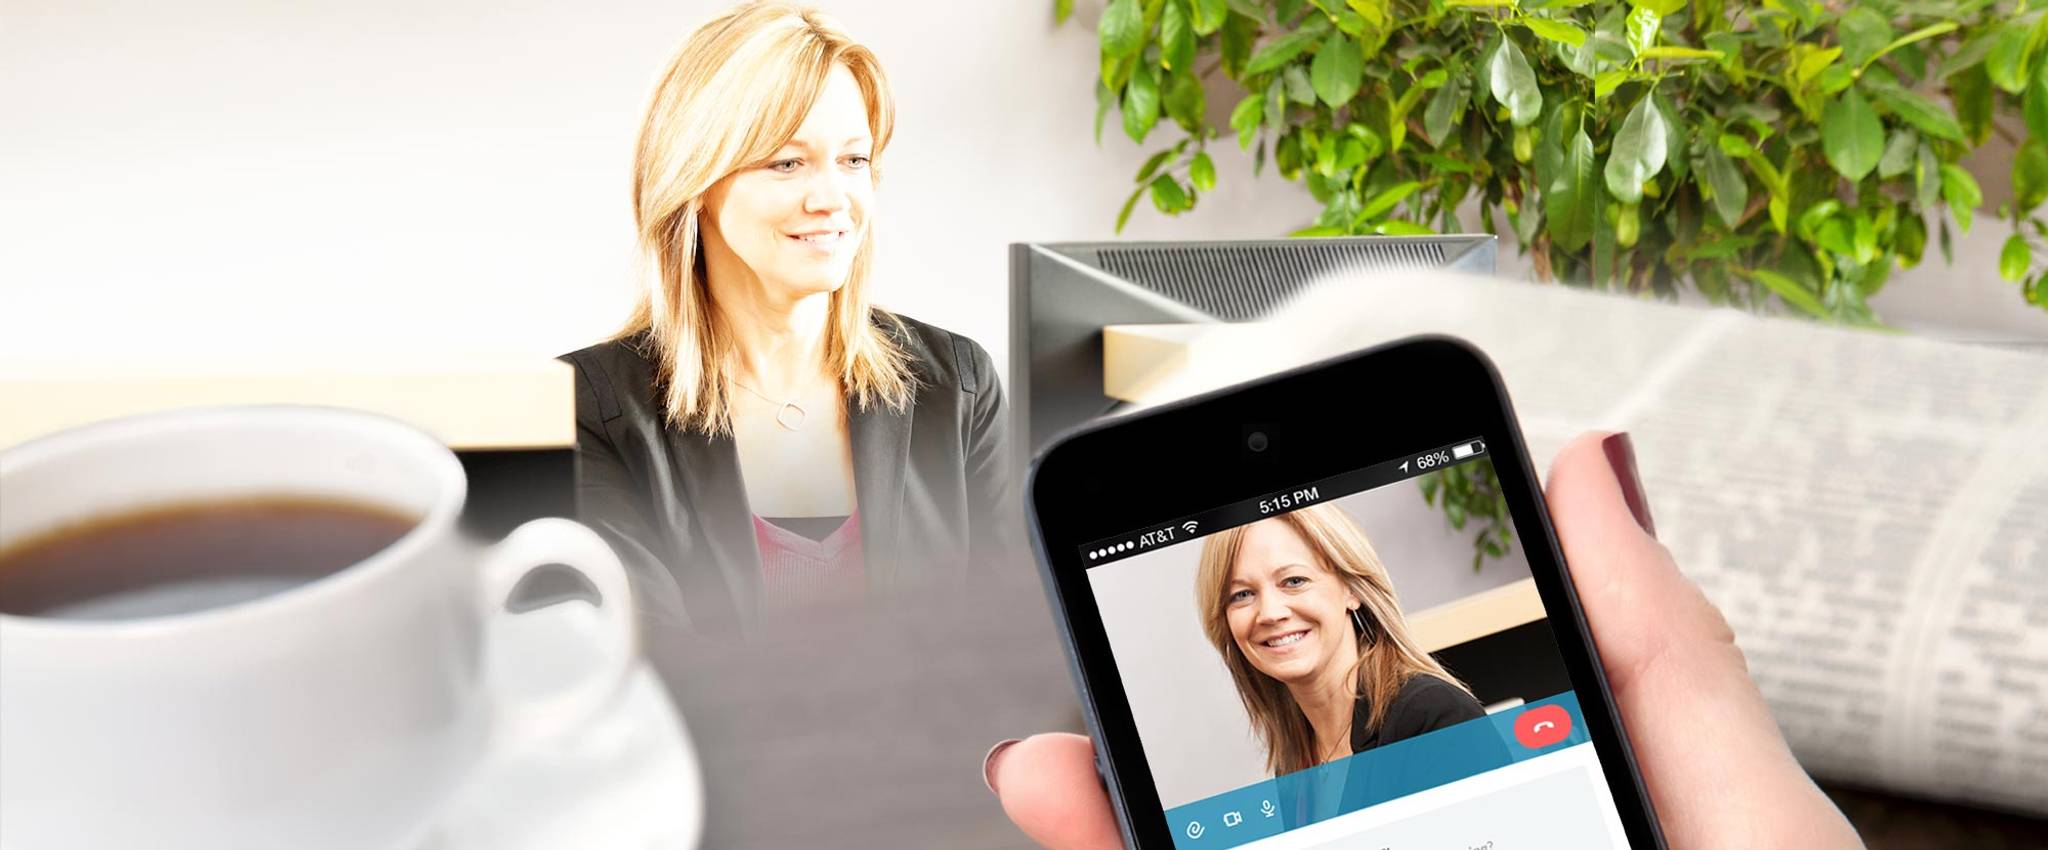 Video chats restore trust in mobile banking